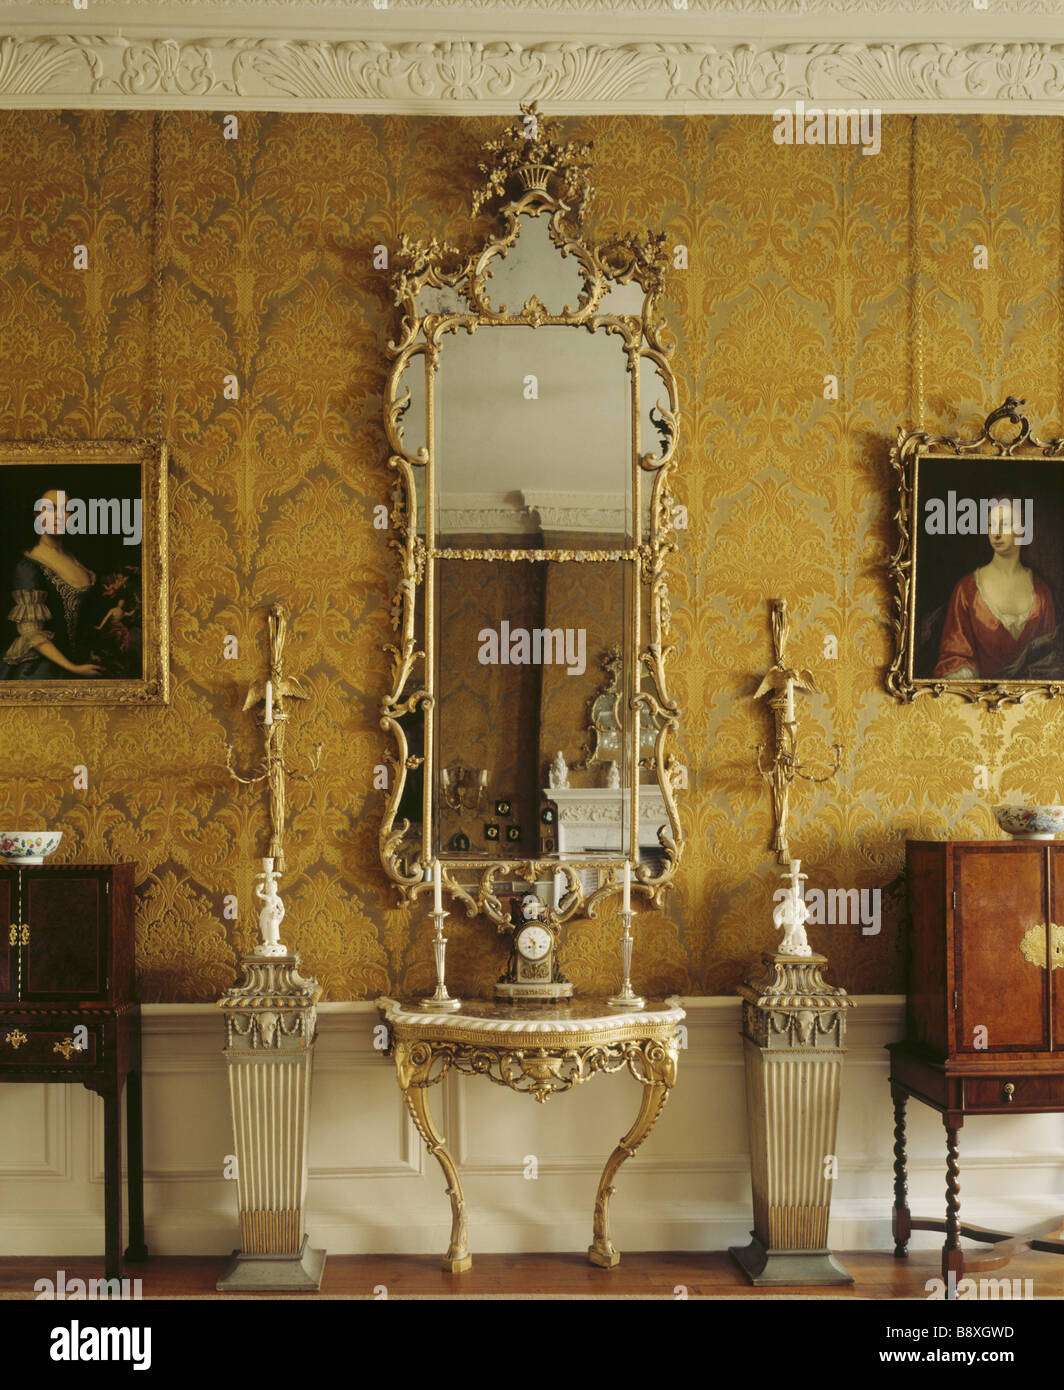 The interior of the Drawing Room with its gilt mirror and side table